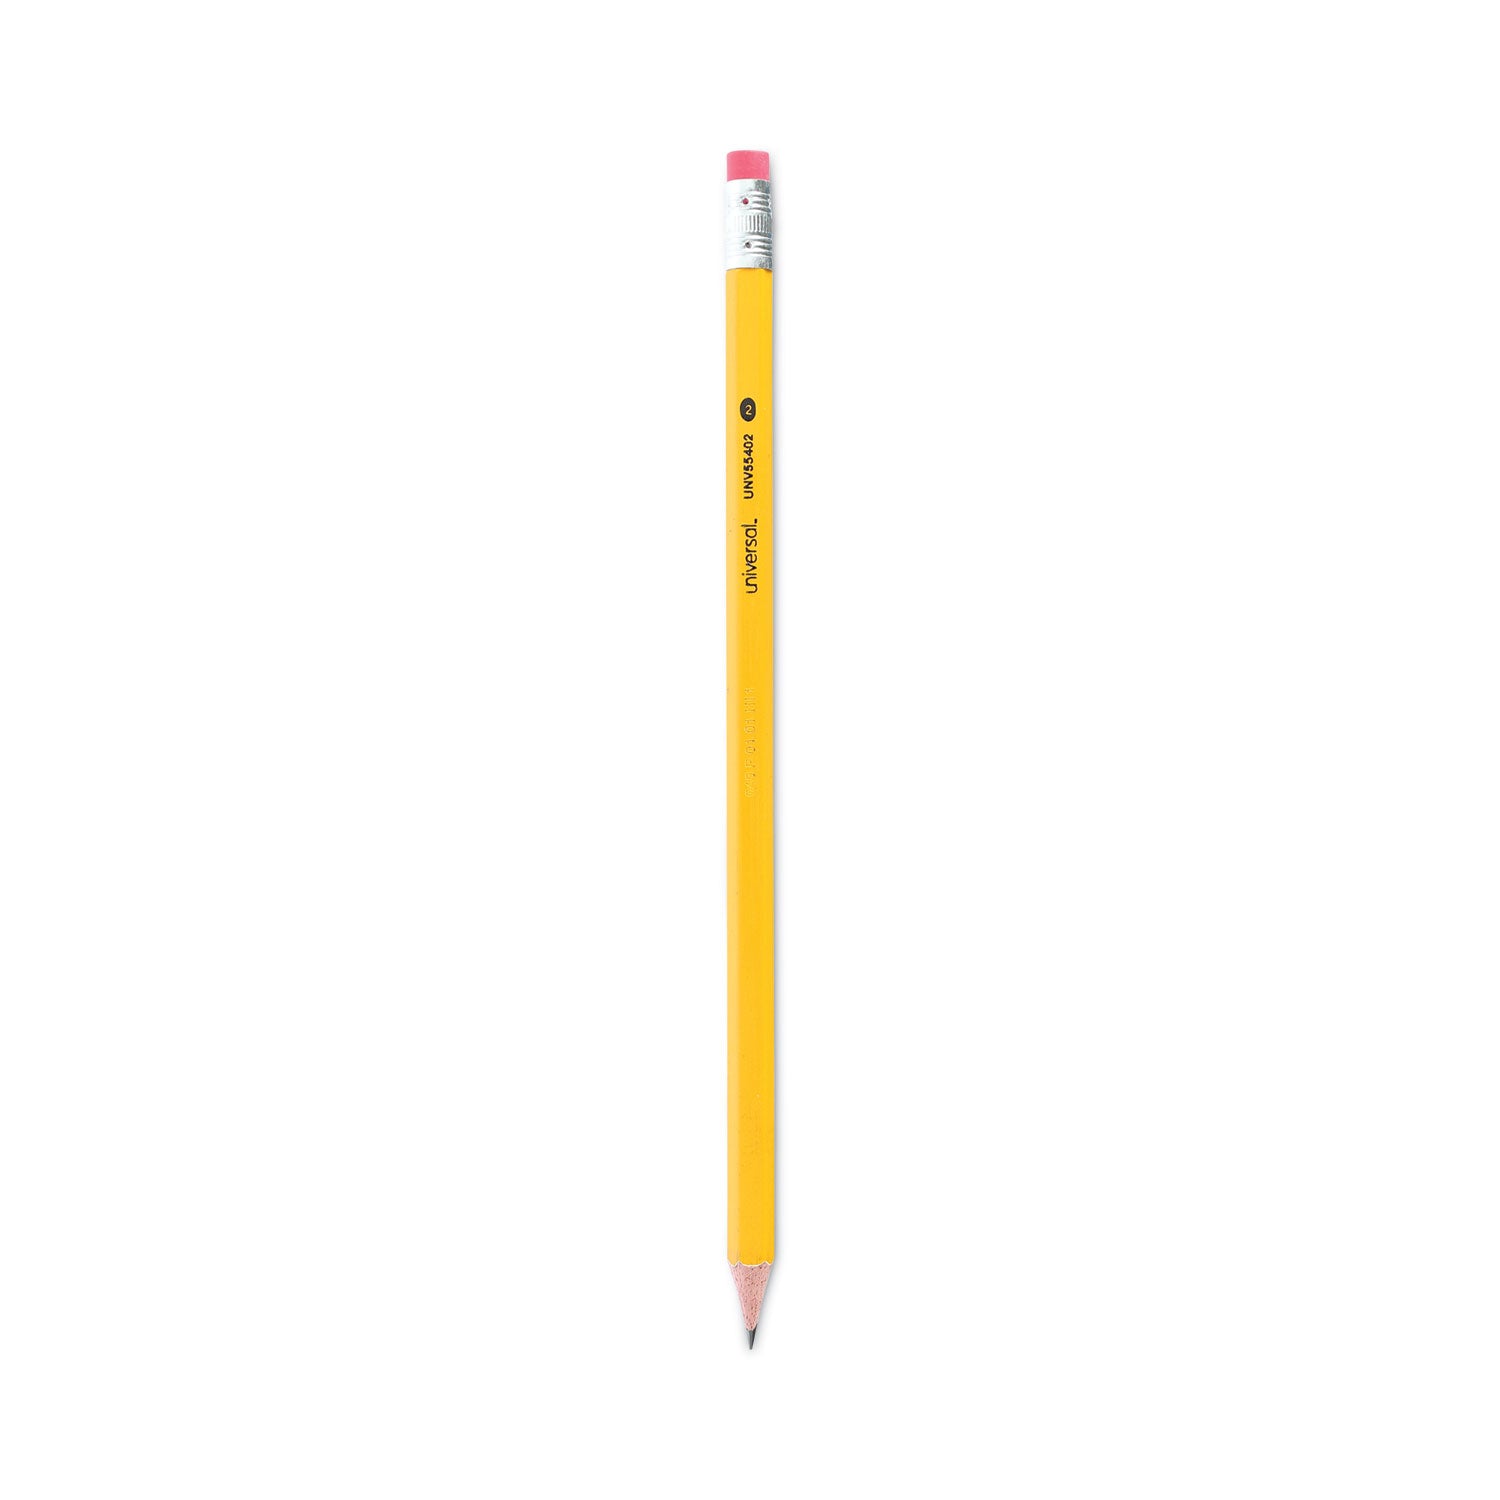 #2-pre-sharpened-woodcase-pencil-hb-#2-black-lead-yellow-barrel-72-pack_unv55402 - 1